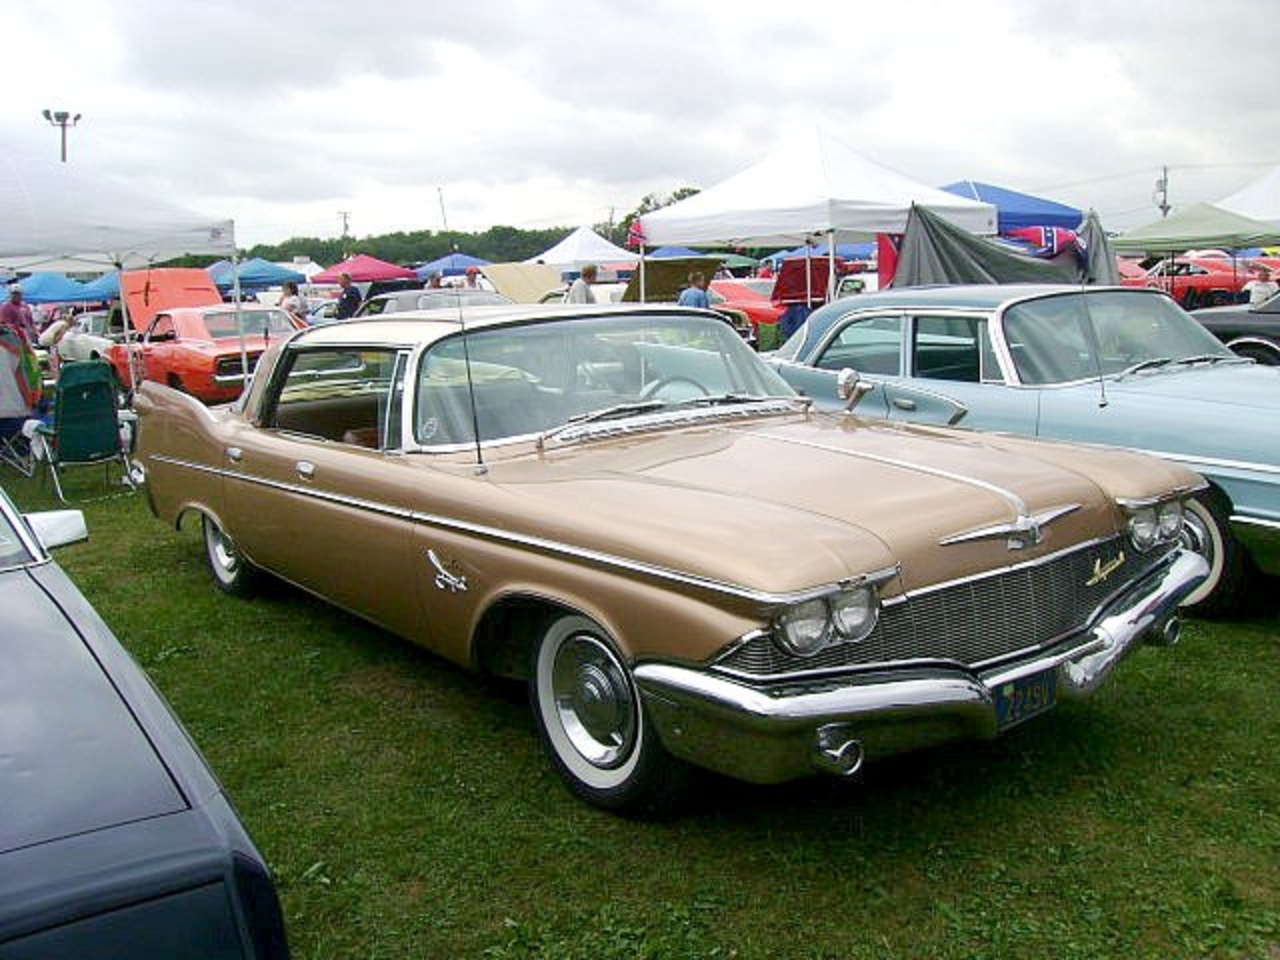 Cool American cars 50s-60s - a gallery on Flickr